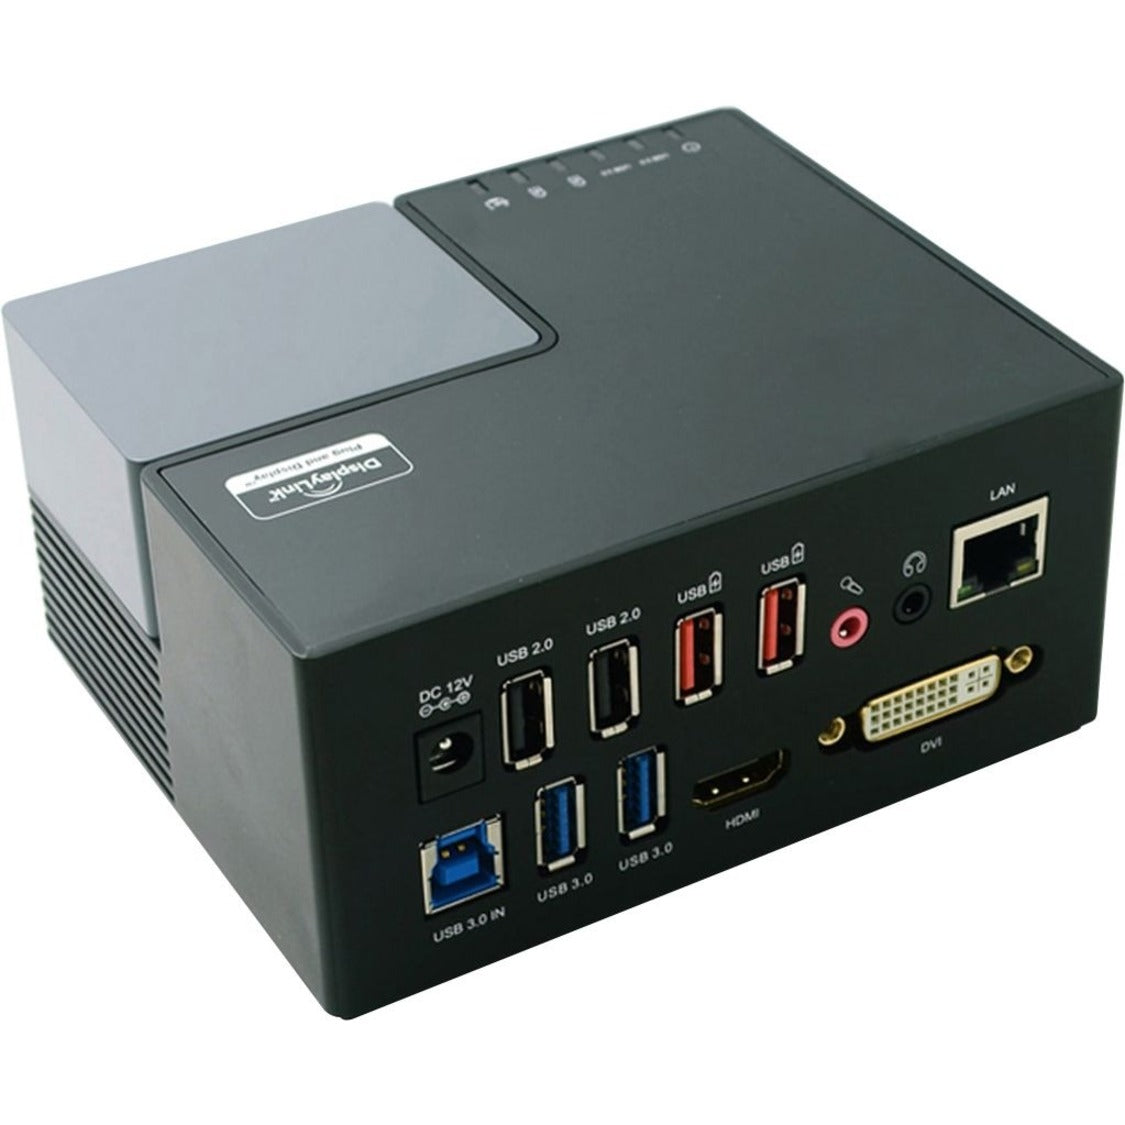 4XEM 4XUG39DK3 USB 3.0 Universal Docking Station Deluxe, 6 USB Ports, DVI, HDMI, RJ-45, Audio In/Out